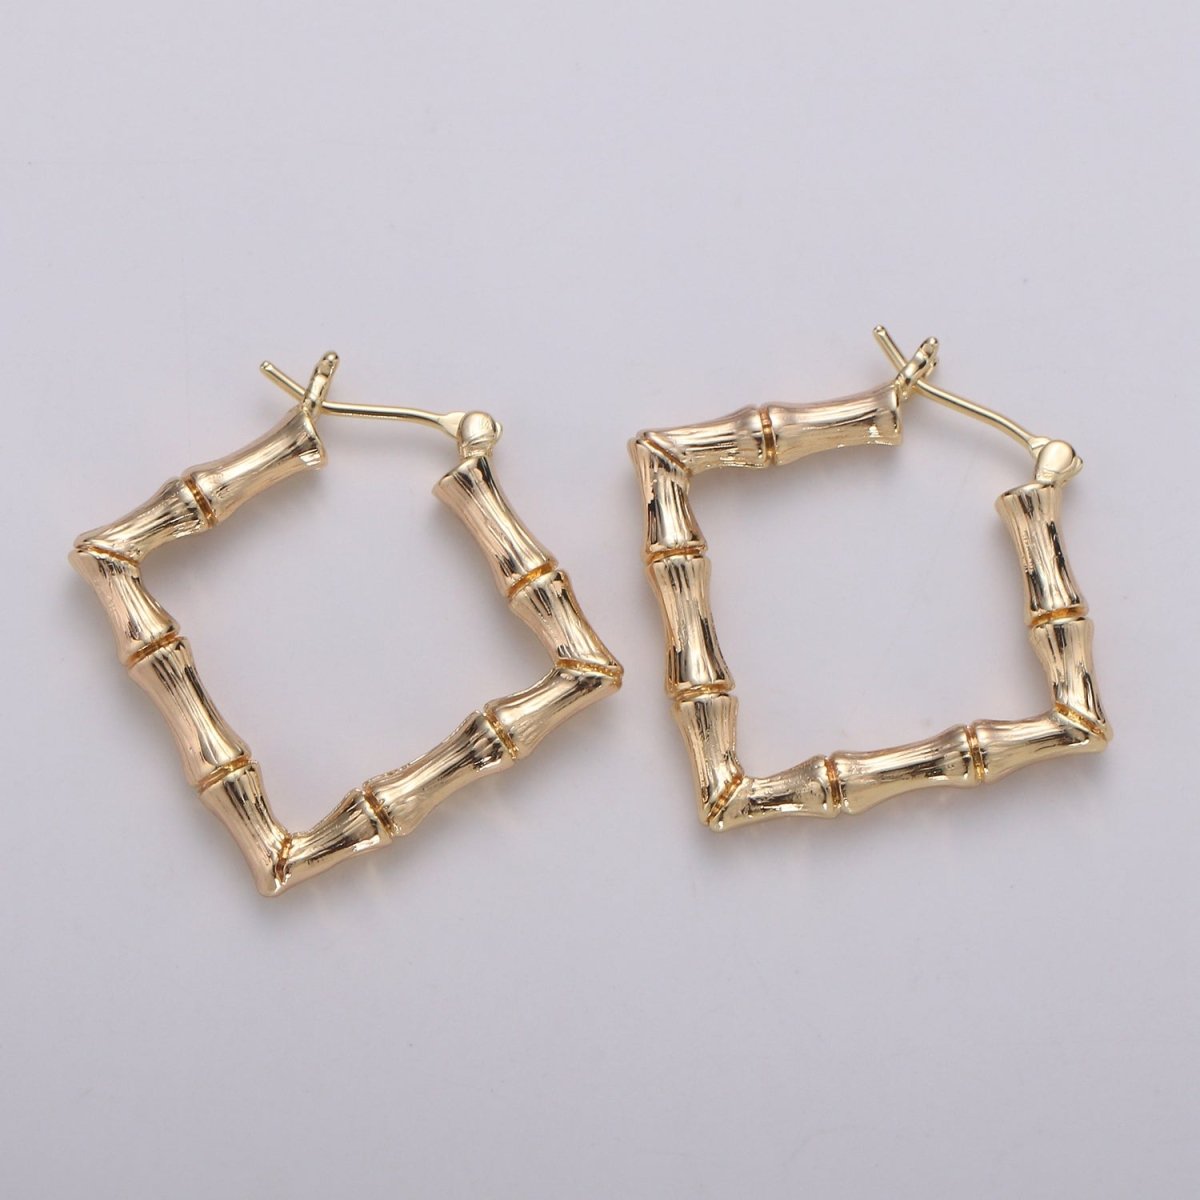 Square Hoop Earrings, 18k Gold Filled Hoop Earrings, Gold Bamboo Earrings, Statement Necklace Everyday Wear Earring for her Q-317 - DLUXCA